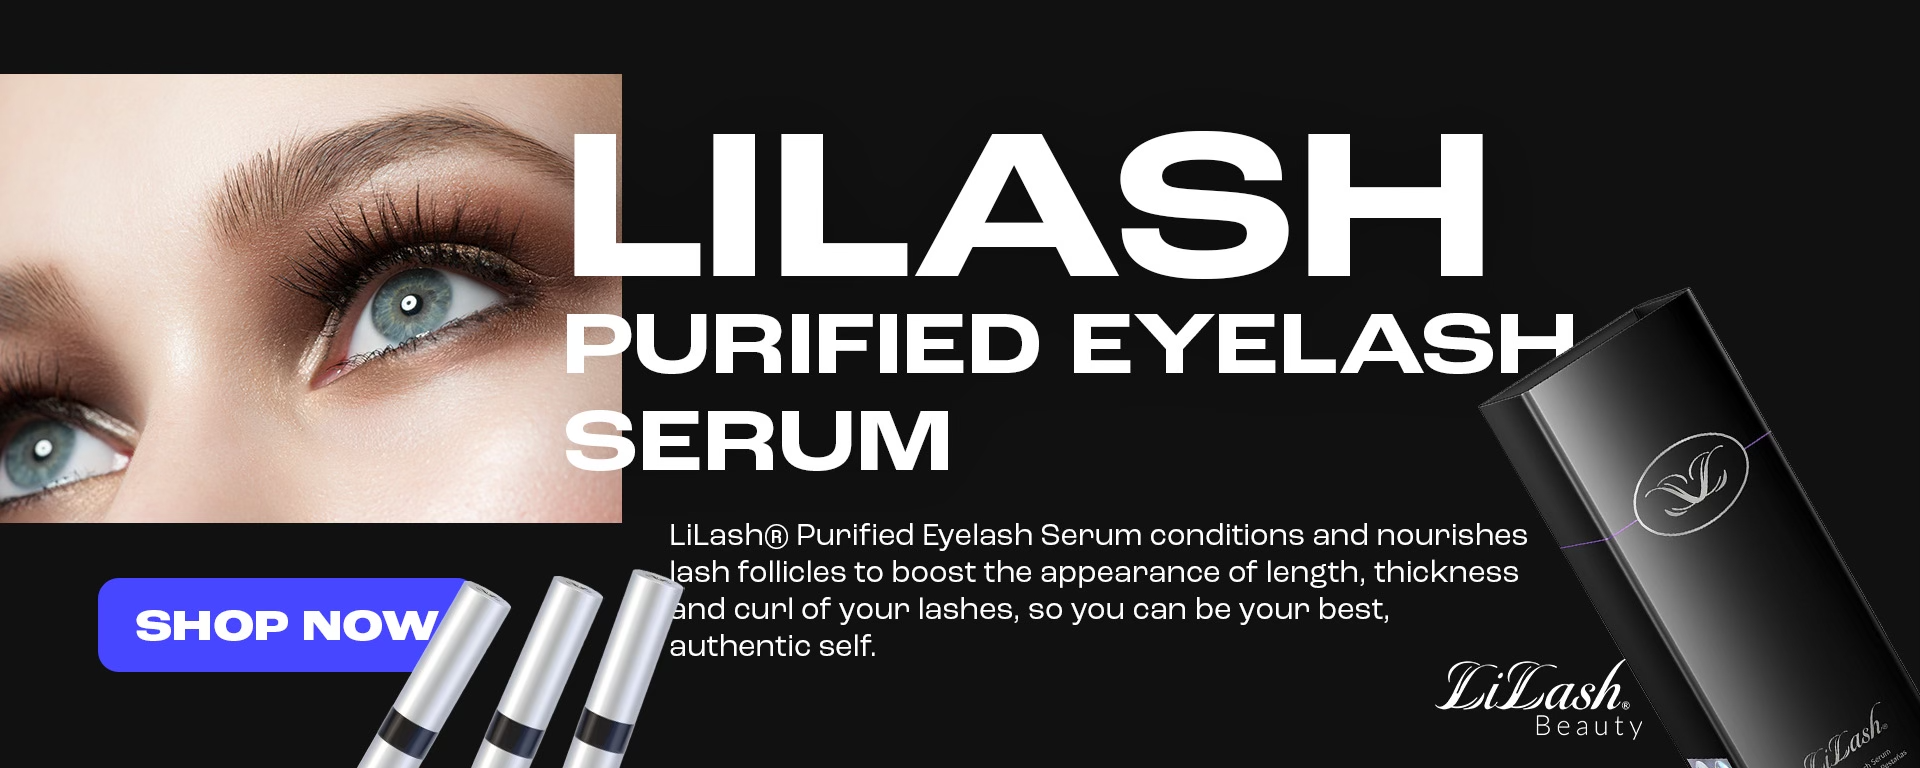 LiLash Purified Eyelash Serum conditions and nourishes lash follicles to boost the appearance of length, thickness, and curl of your lashes, so you can be your best authentic self.